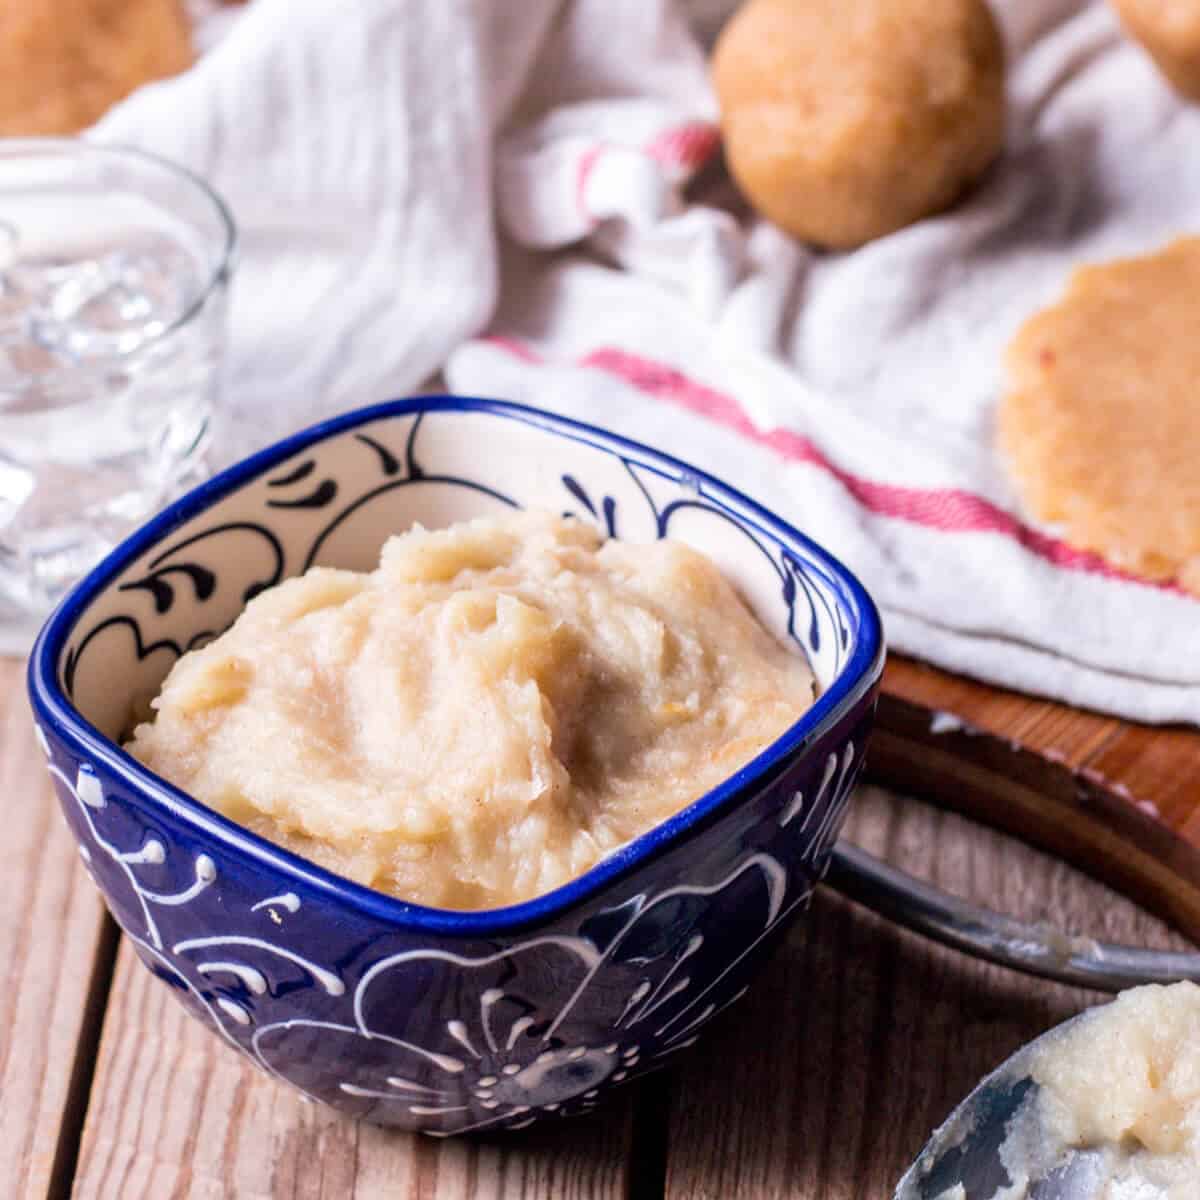 A small bowl of dulce de boniato, a sweet Spanish pastry filling made from white sweet potatoes.